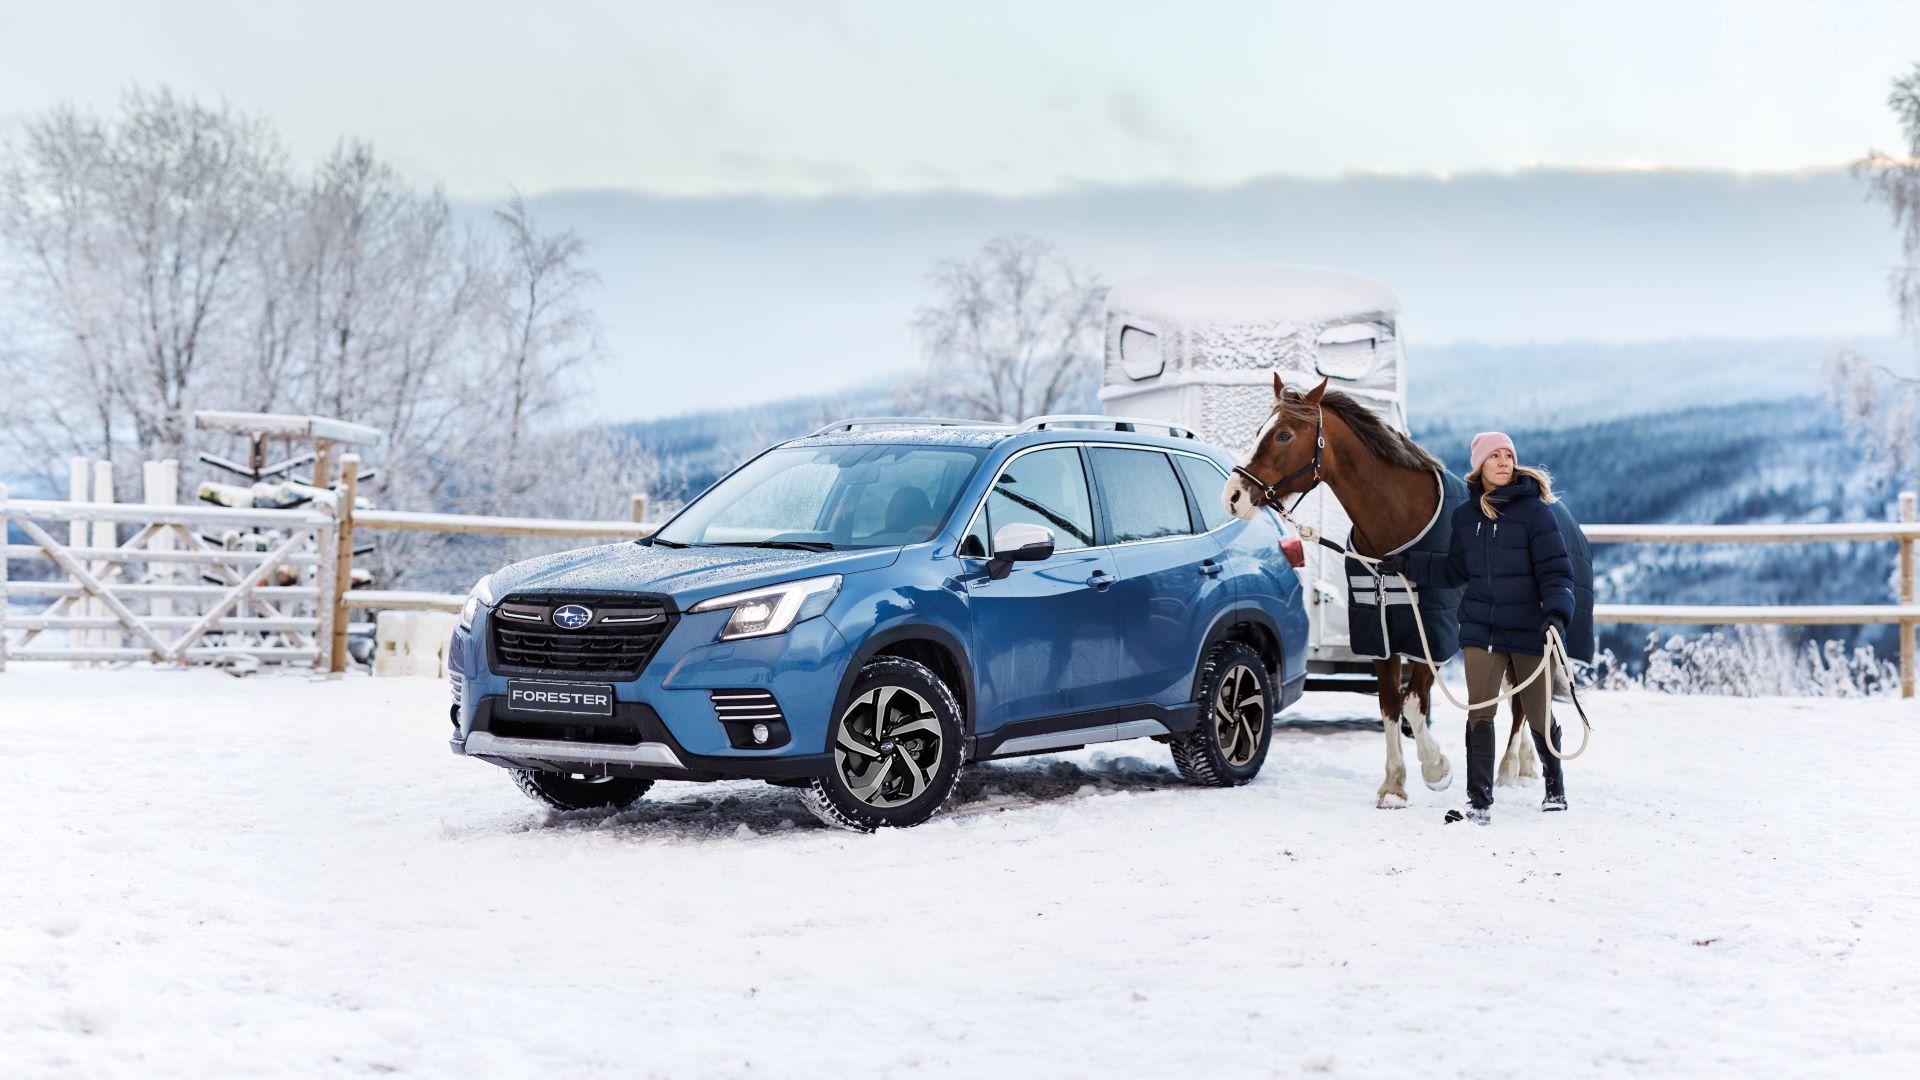 Get ready for winter with Subaru